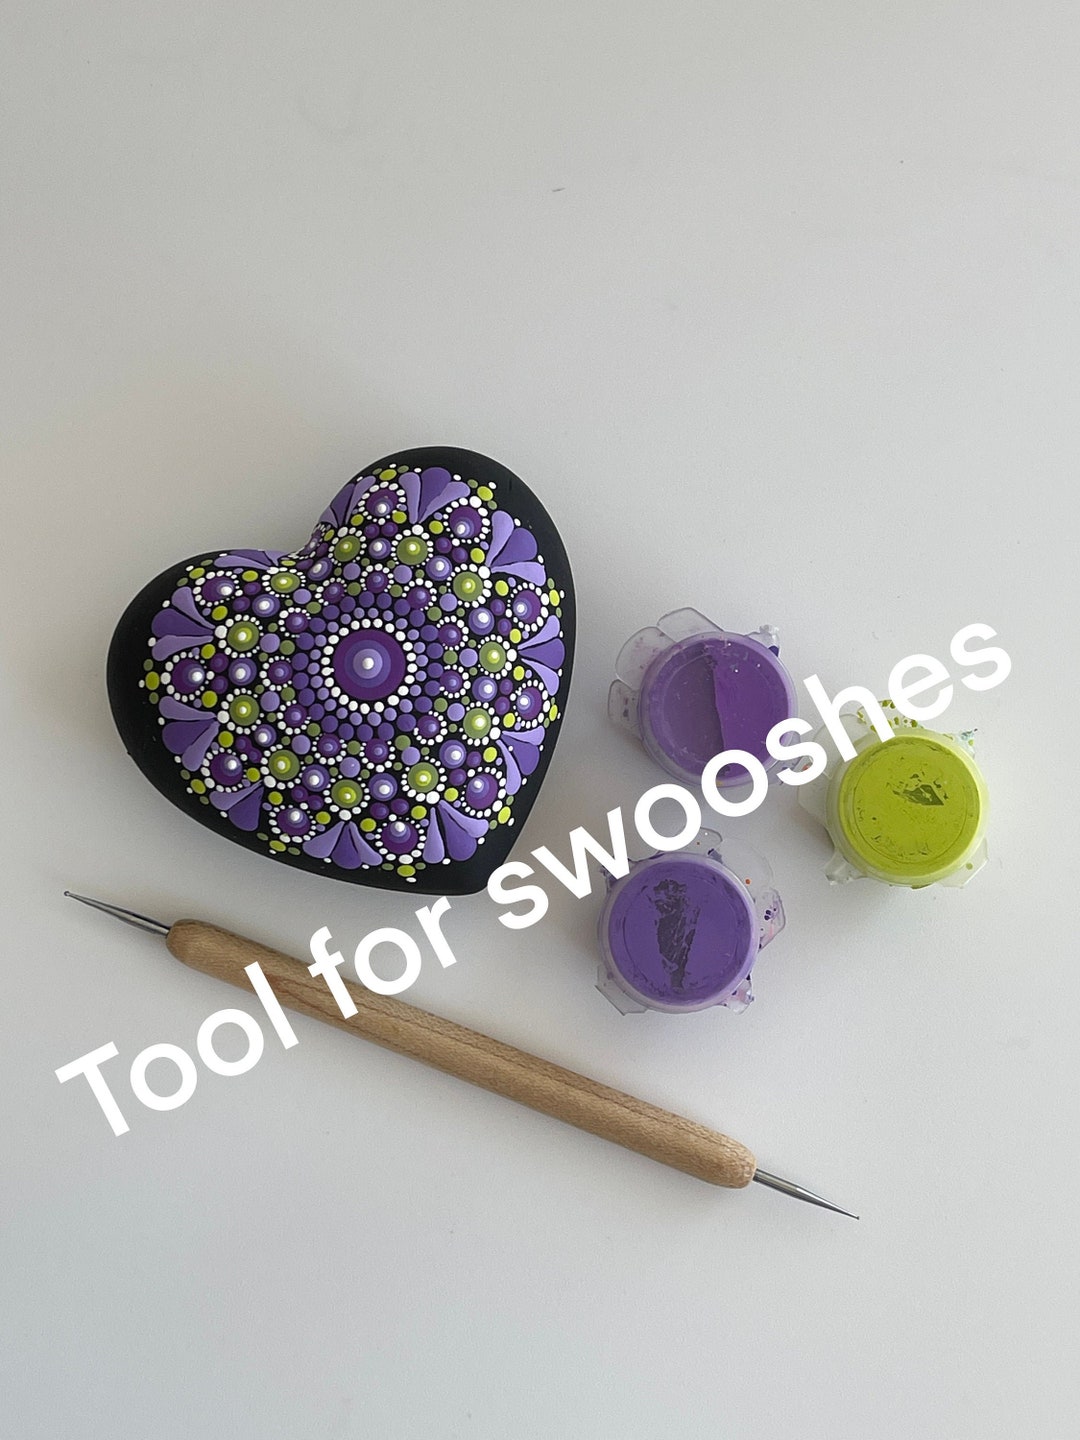 5 Pieces Mandala Dotting Tools for Rocks Different Size Painting Tools UK  STOCK